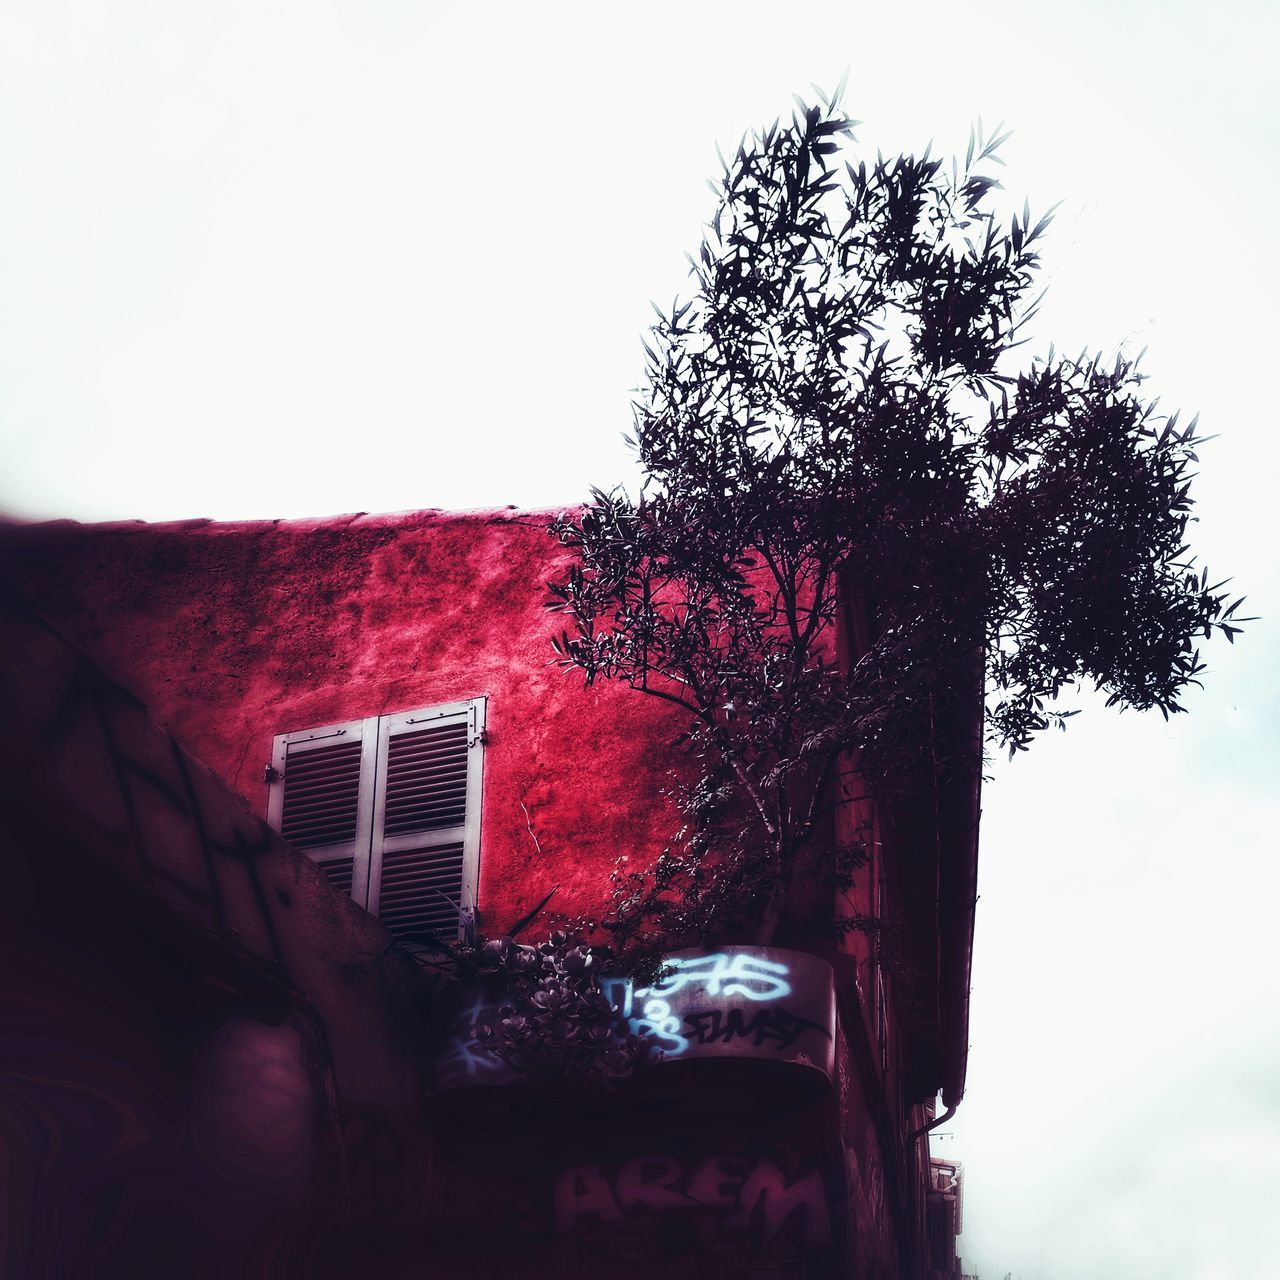 tree, sky, plant, building exterior, architecture, built structure, nature, building, clear sky, day, house, no people, low angle view, growth, outdoors, red, residential district, portrait, wall - building feature